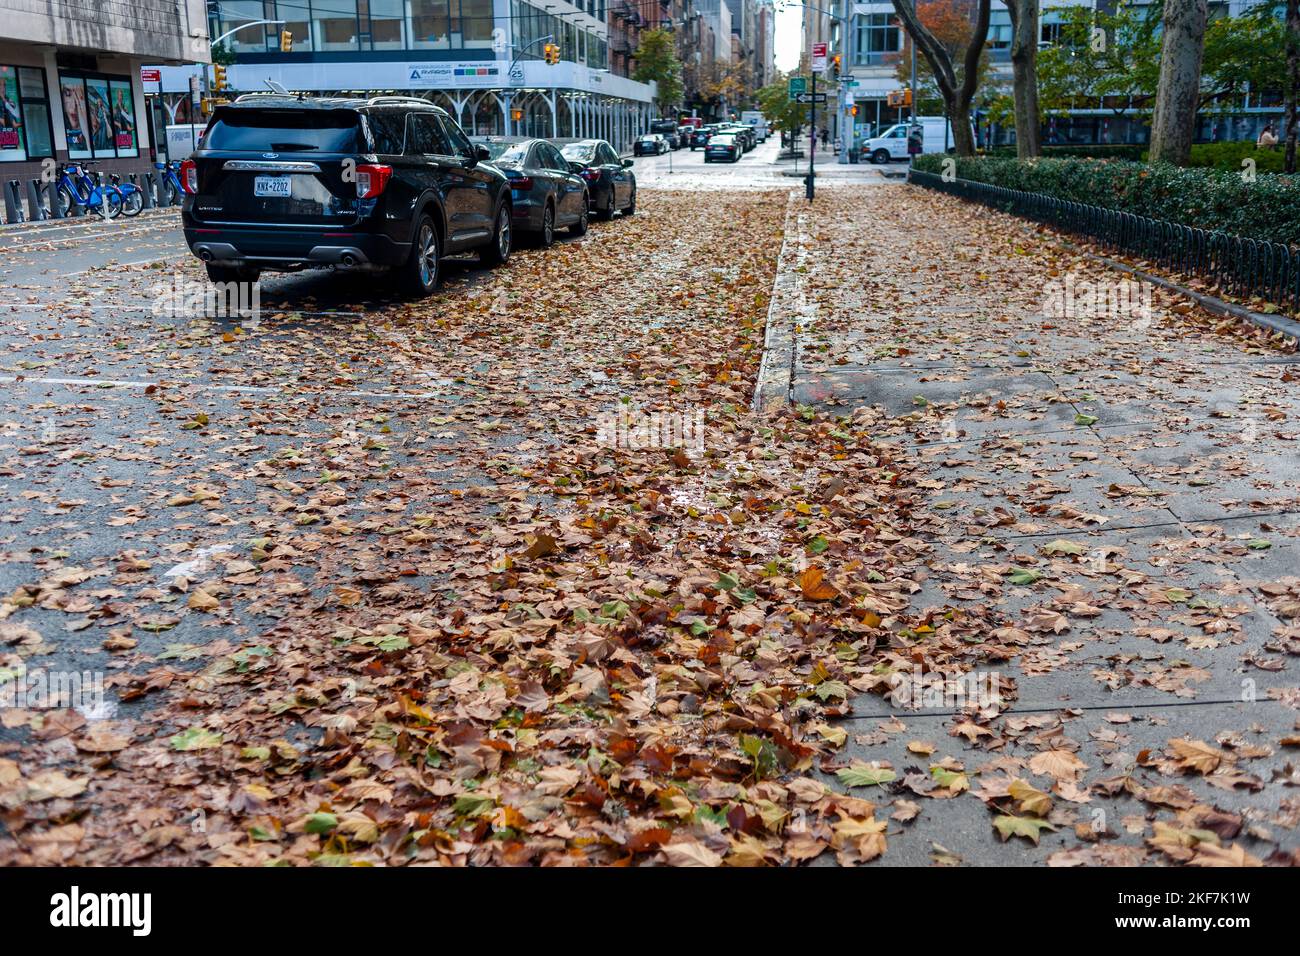 Autumn leaves litter the streets after the remains of Hurricane Nicole passes through New York in Chelsea, on Saturday, November 12, 2022. The city is making an effort to clean catch basins and storm drains to prevent localized flooding. (© Richard B. Levine) Stock Photo